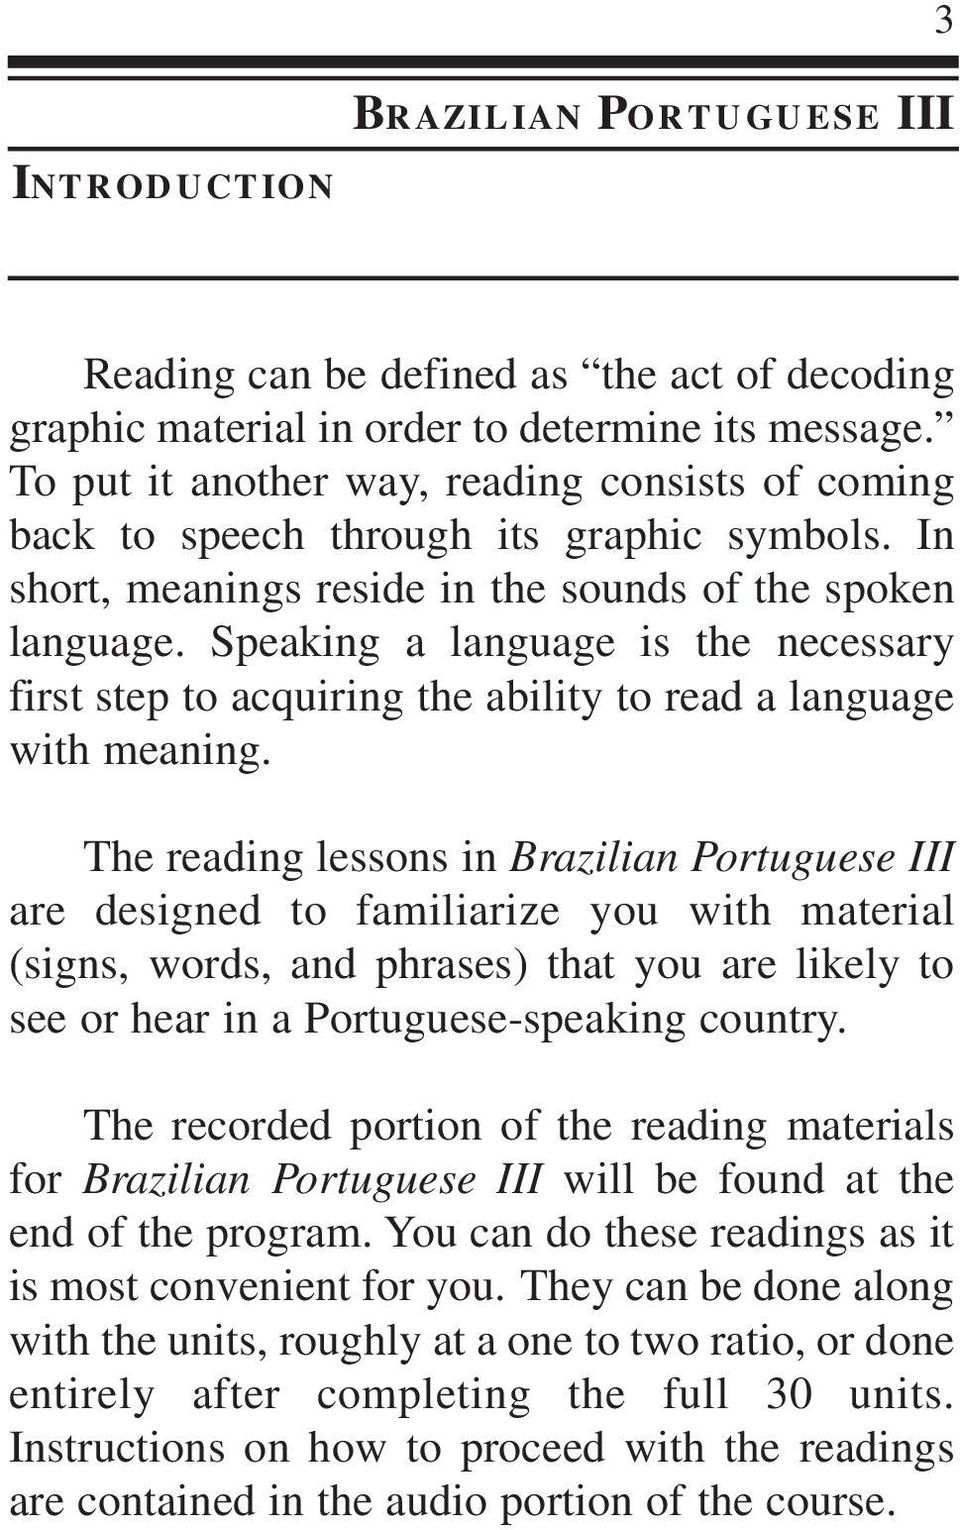 Speaking a language is the necessary first step to acquiring the ability to read a language with meaning.